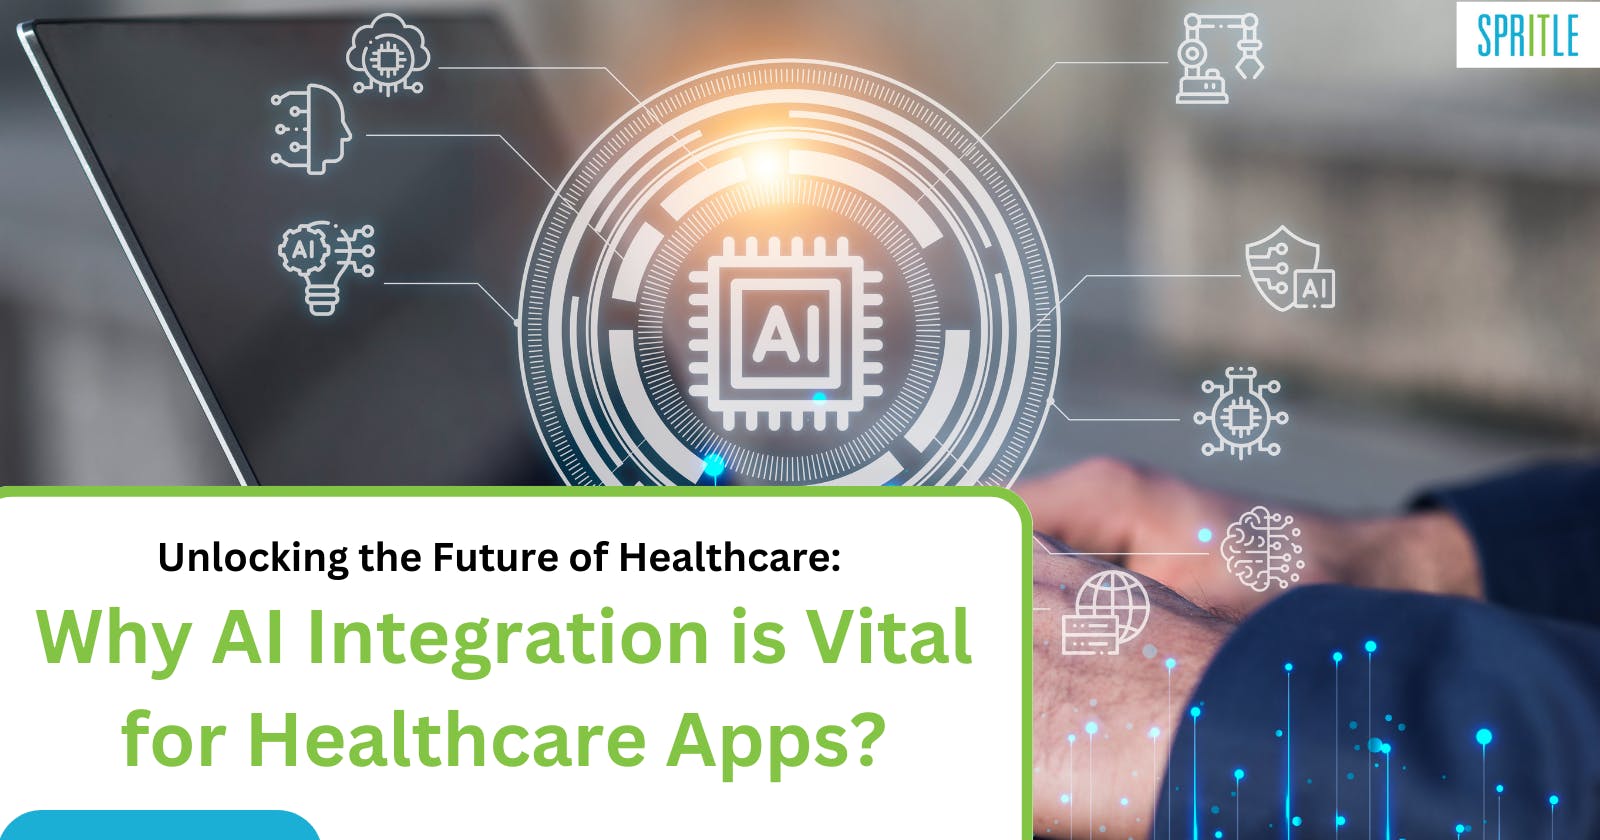 Why AI Integration is Vital for Healthcare Apps?